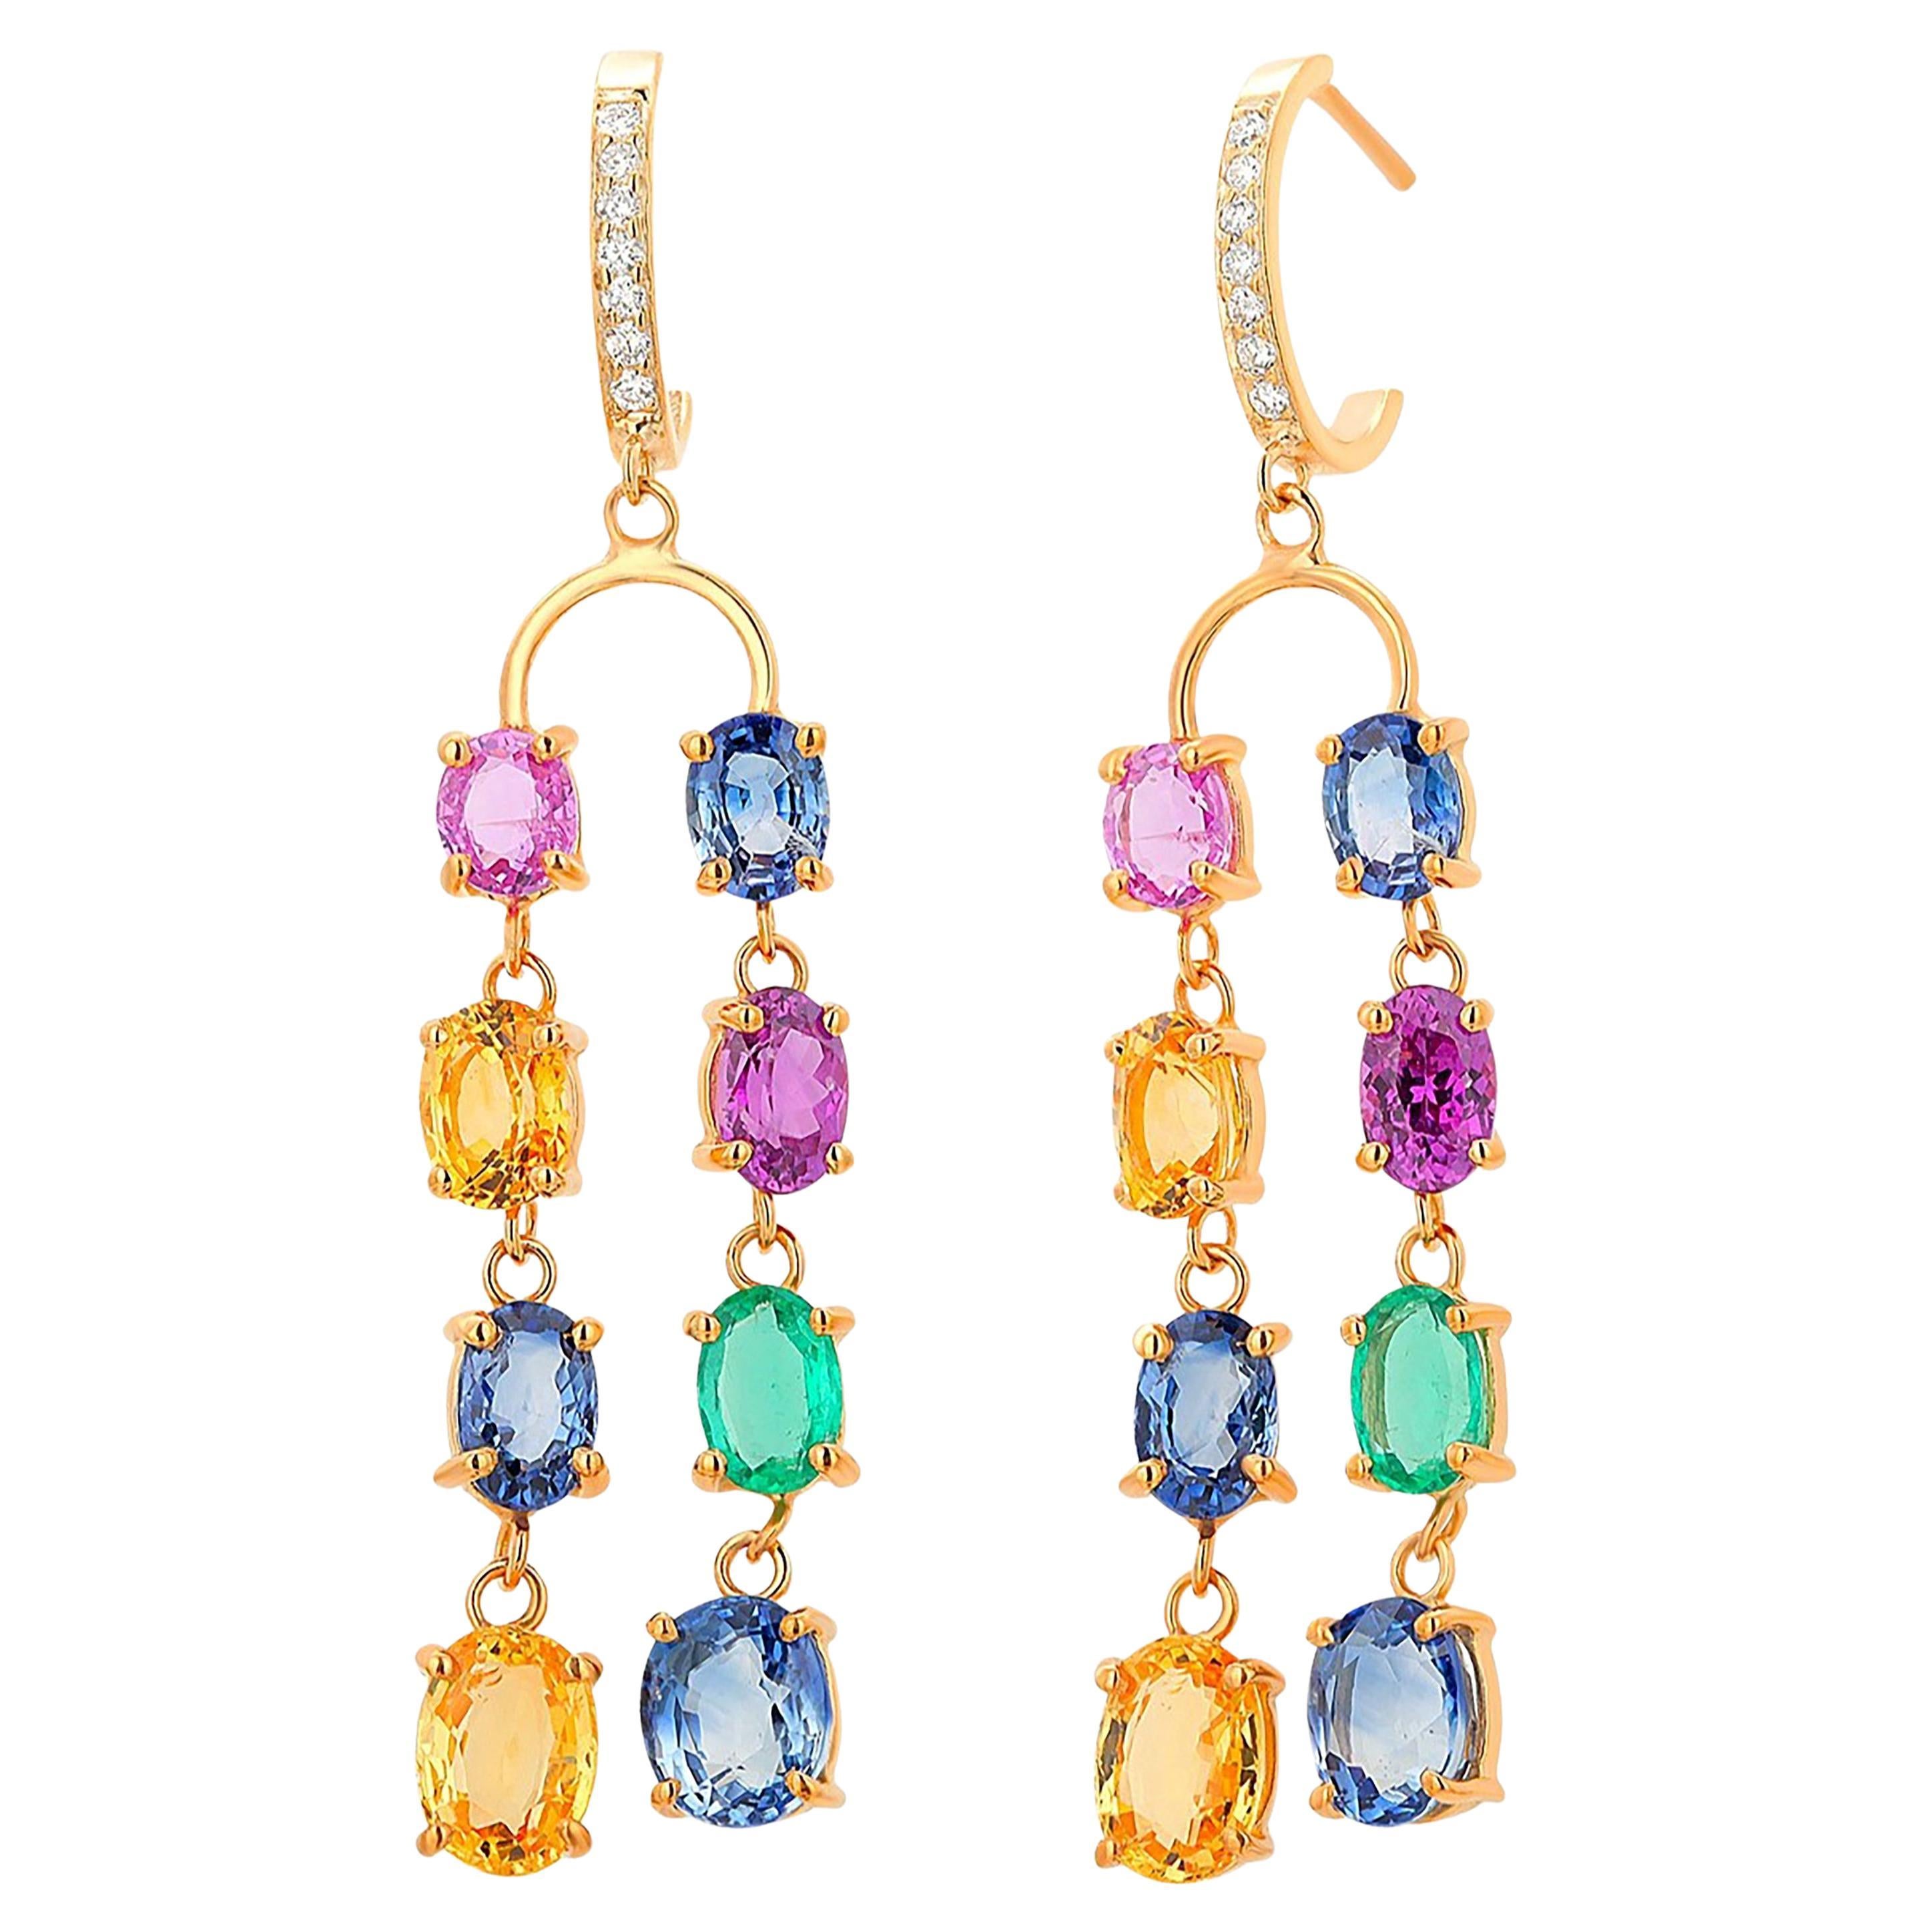 Double Lined Multi-Colorful Precious Stones 11.35 Carat 2 Inch Hoop Earrings